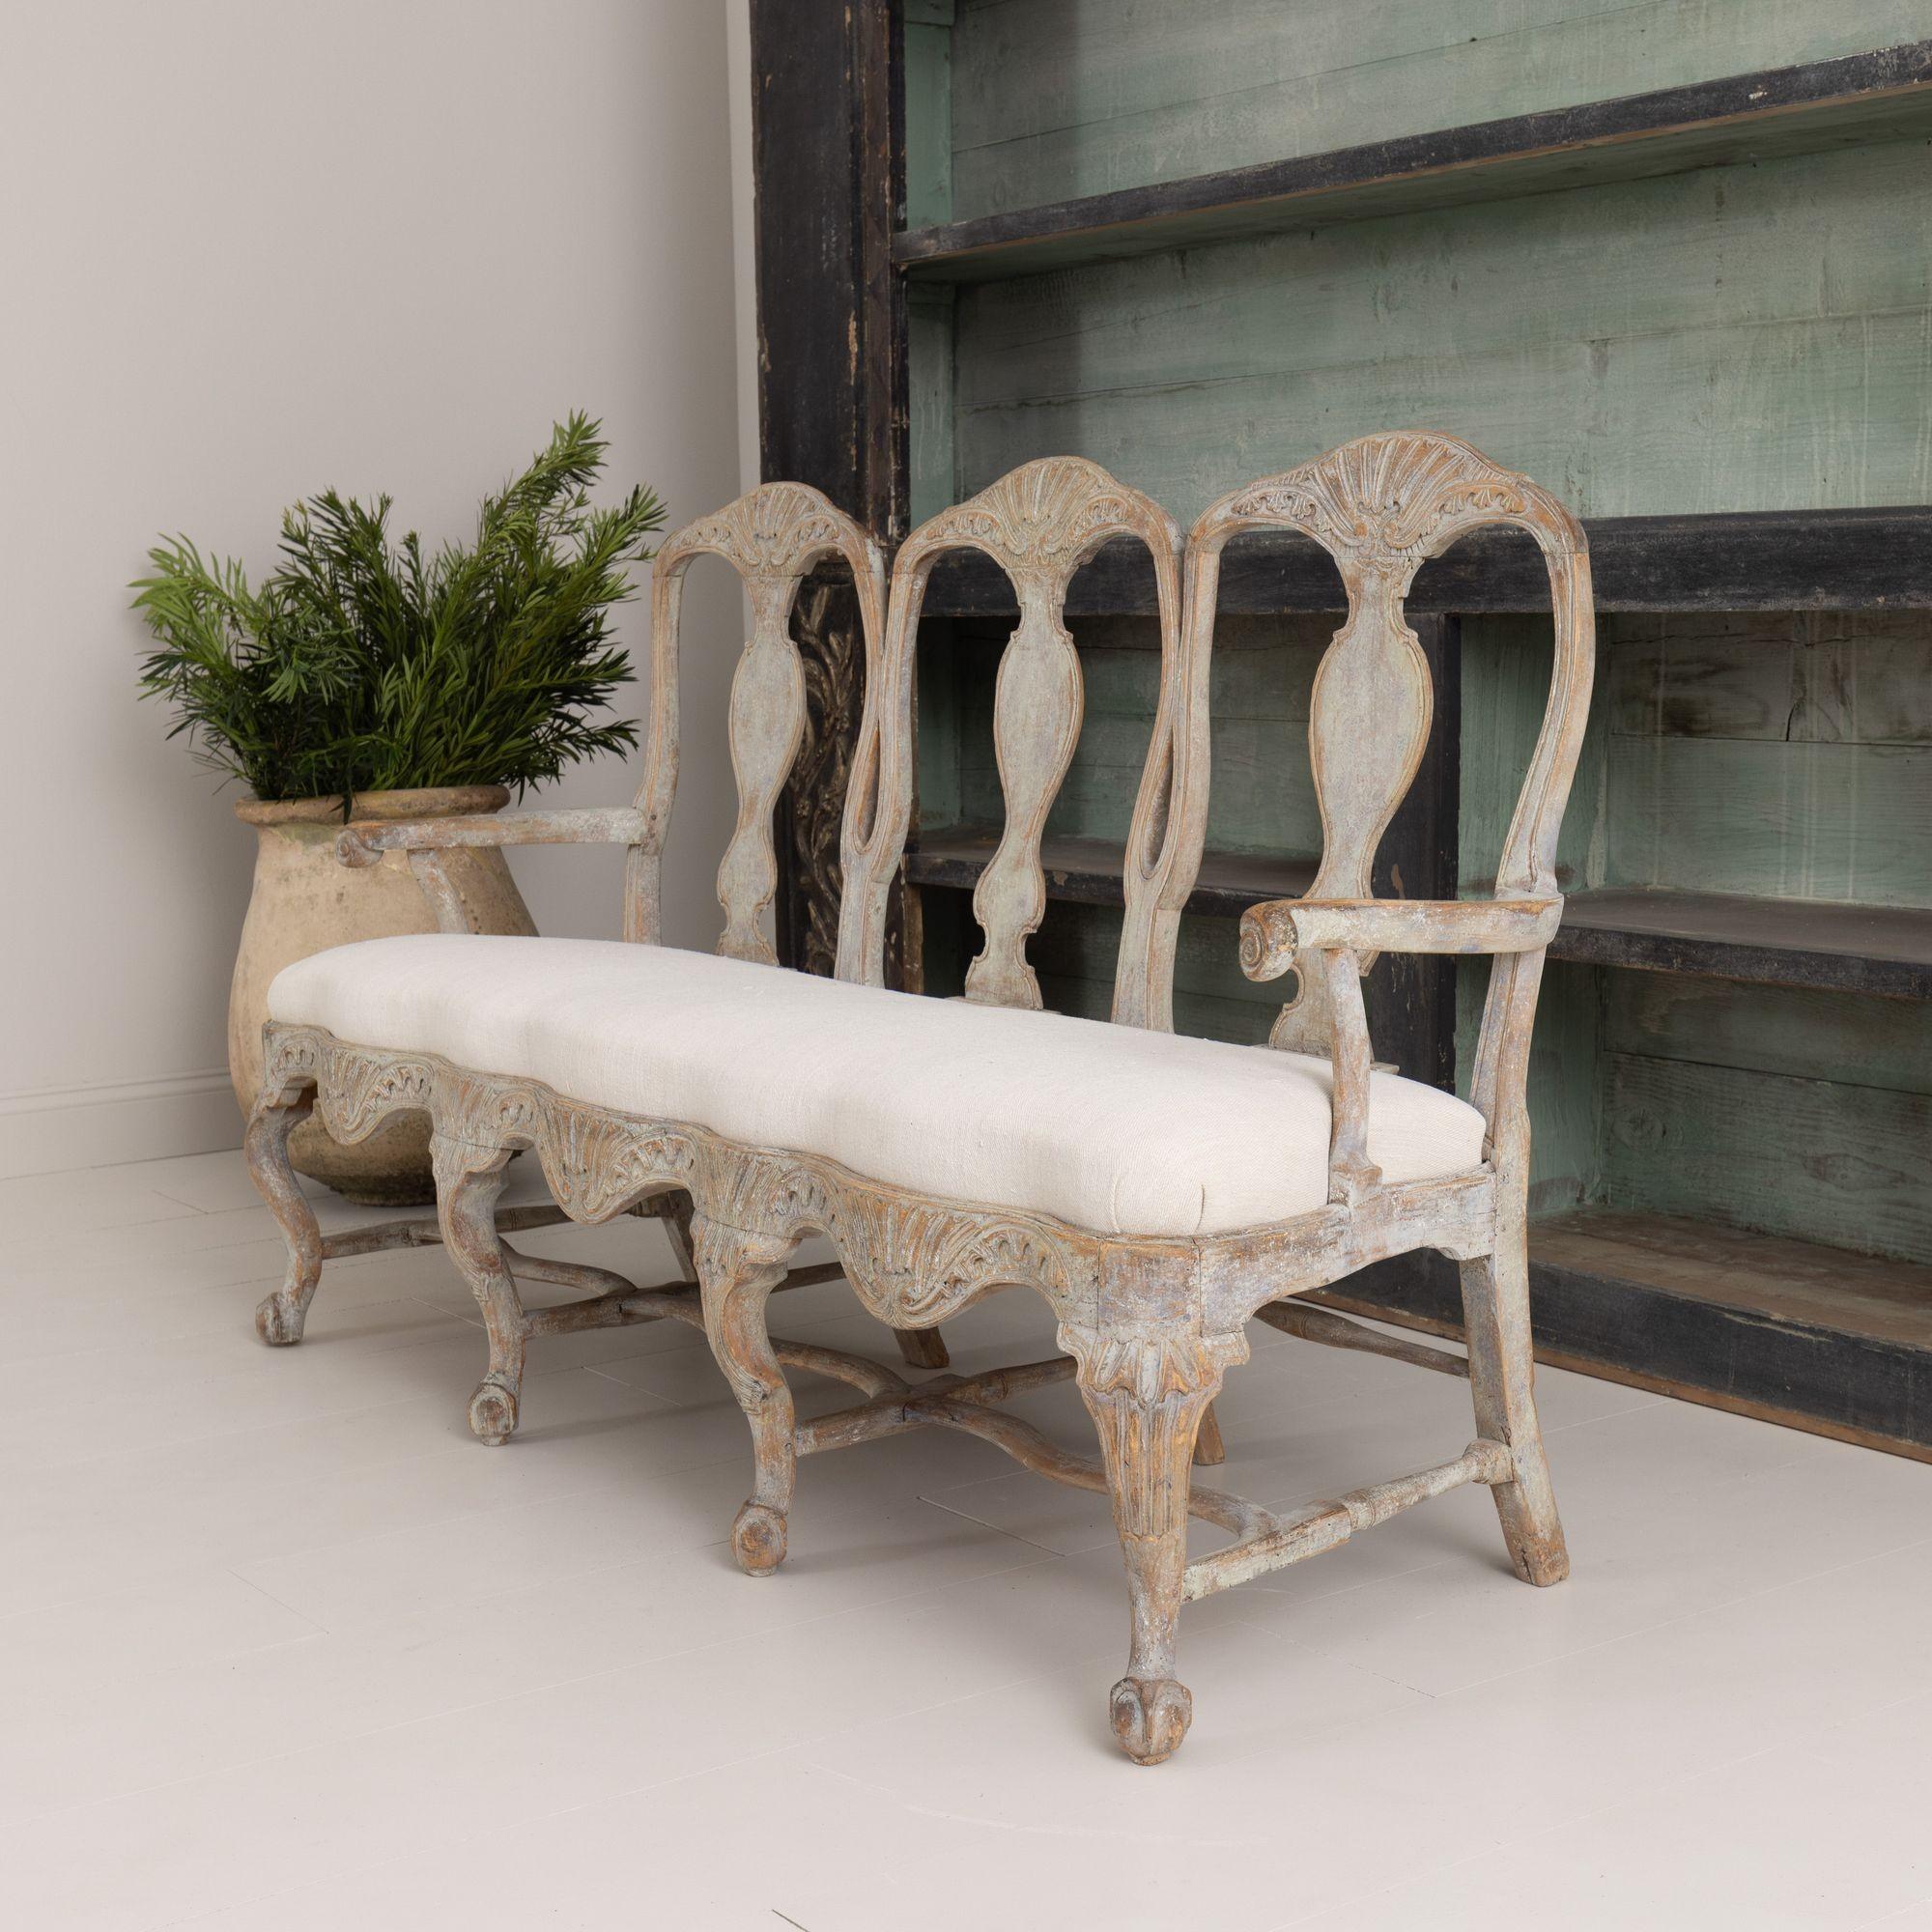 18th Century Swedish Rococo Period Settee or Sofa Bench in Original Paint For Sale 6